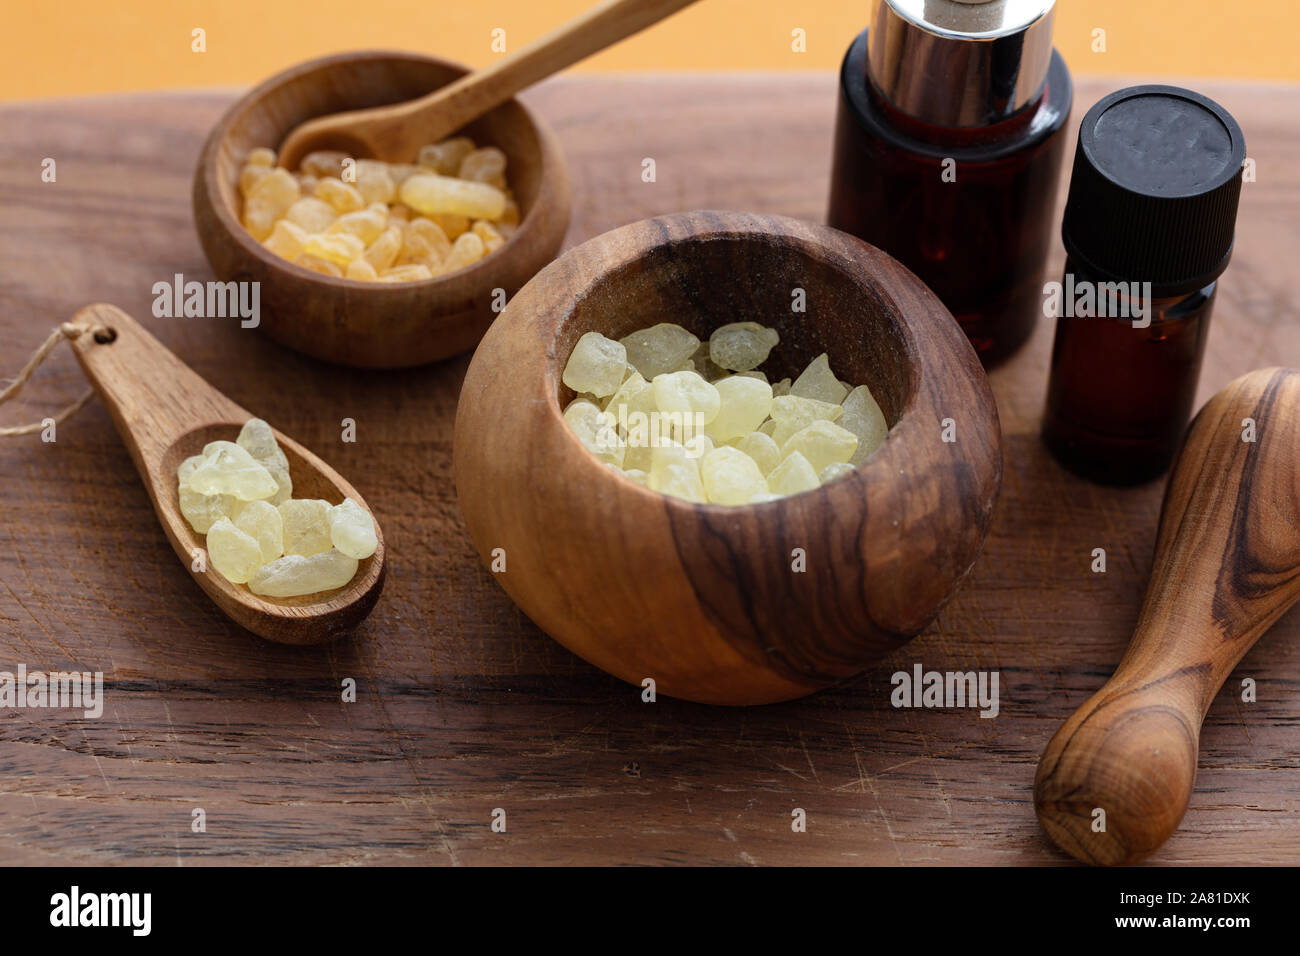 Mastic resin tears. Chios mastic in wooden bowls and essential oil on wood background Stock Photo